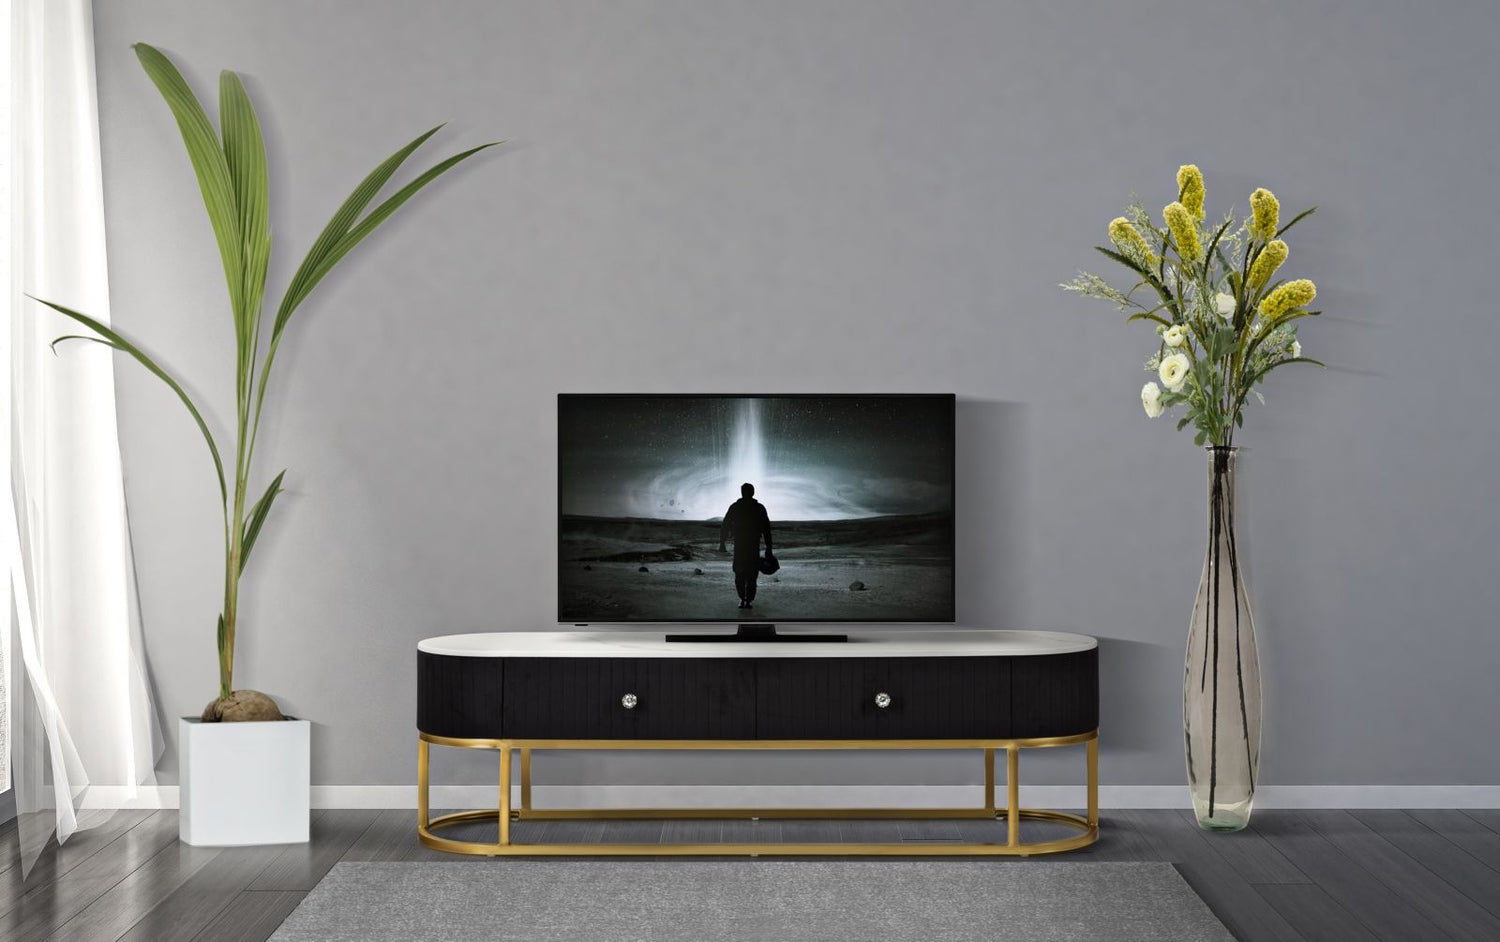 Buy Wood and metal TV chest upholstered with fabric, 2 drawers, Montpellier Black / Gold, l150xW42xH45 cm online, best price, free delivery